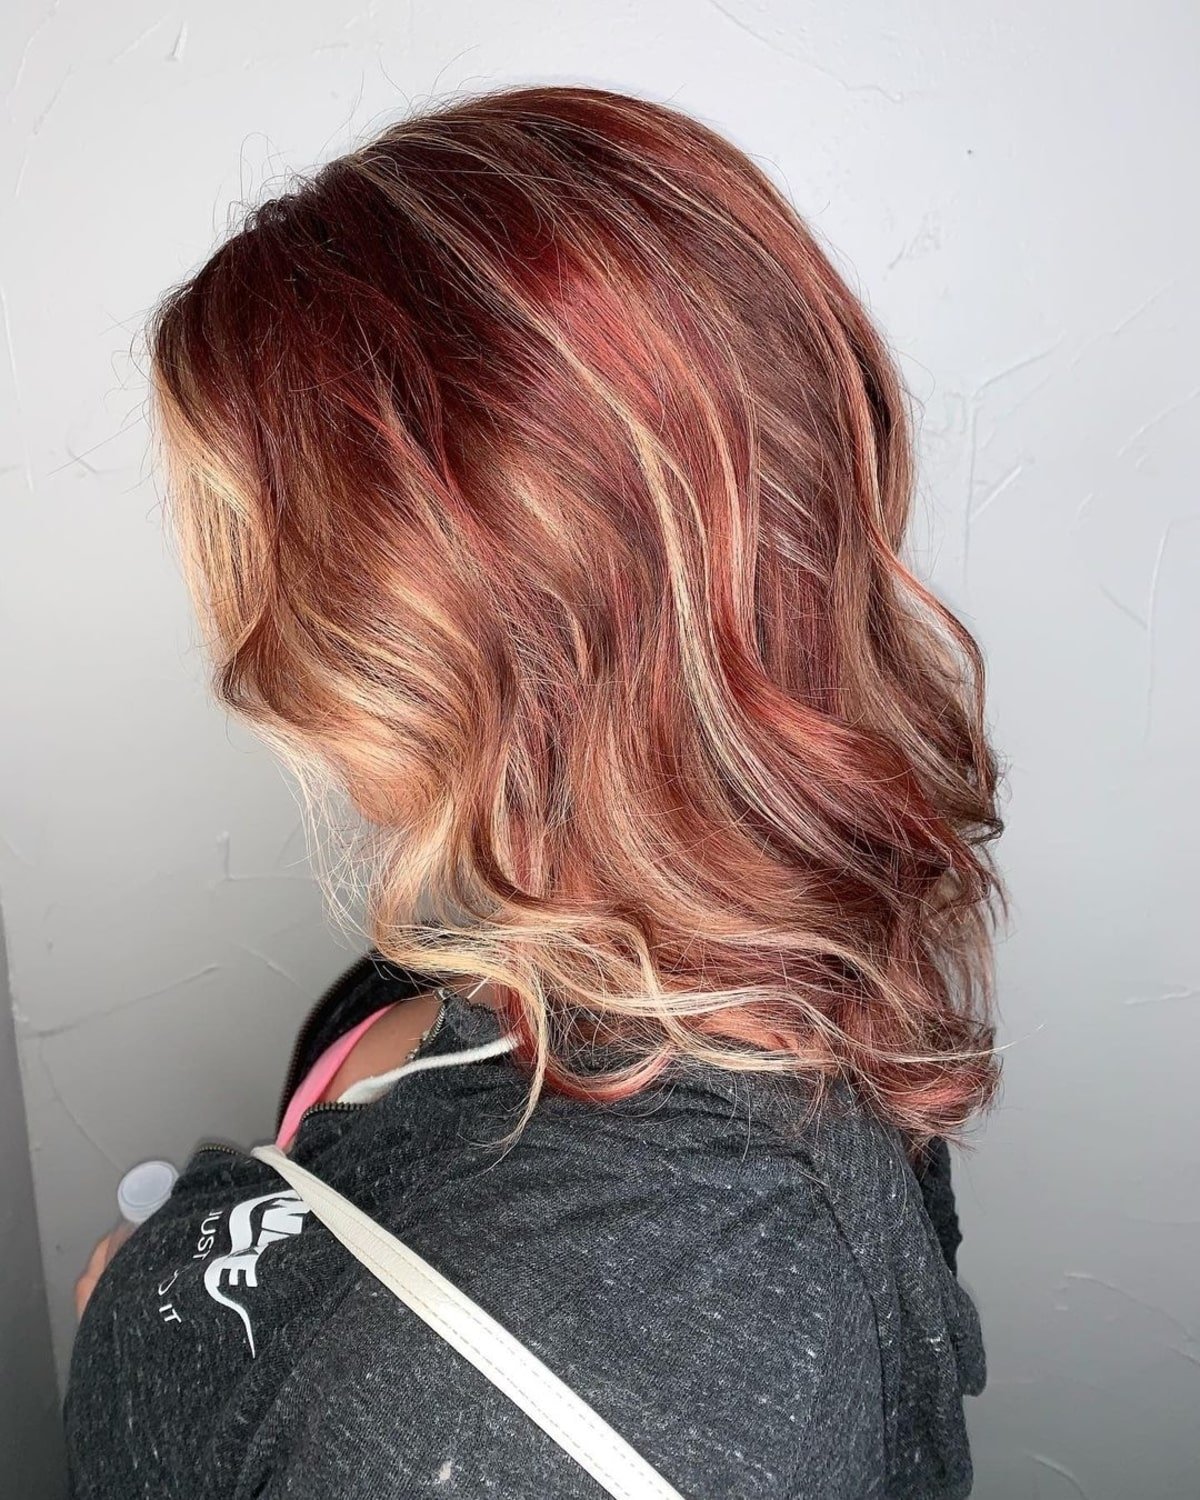 Red-blonde hair with highlights